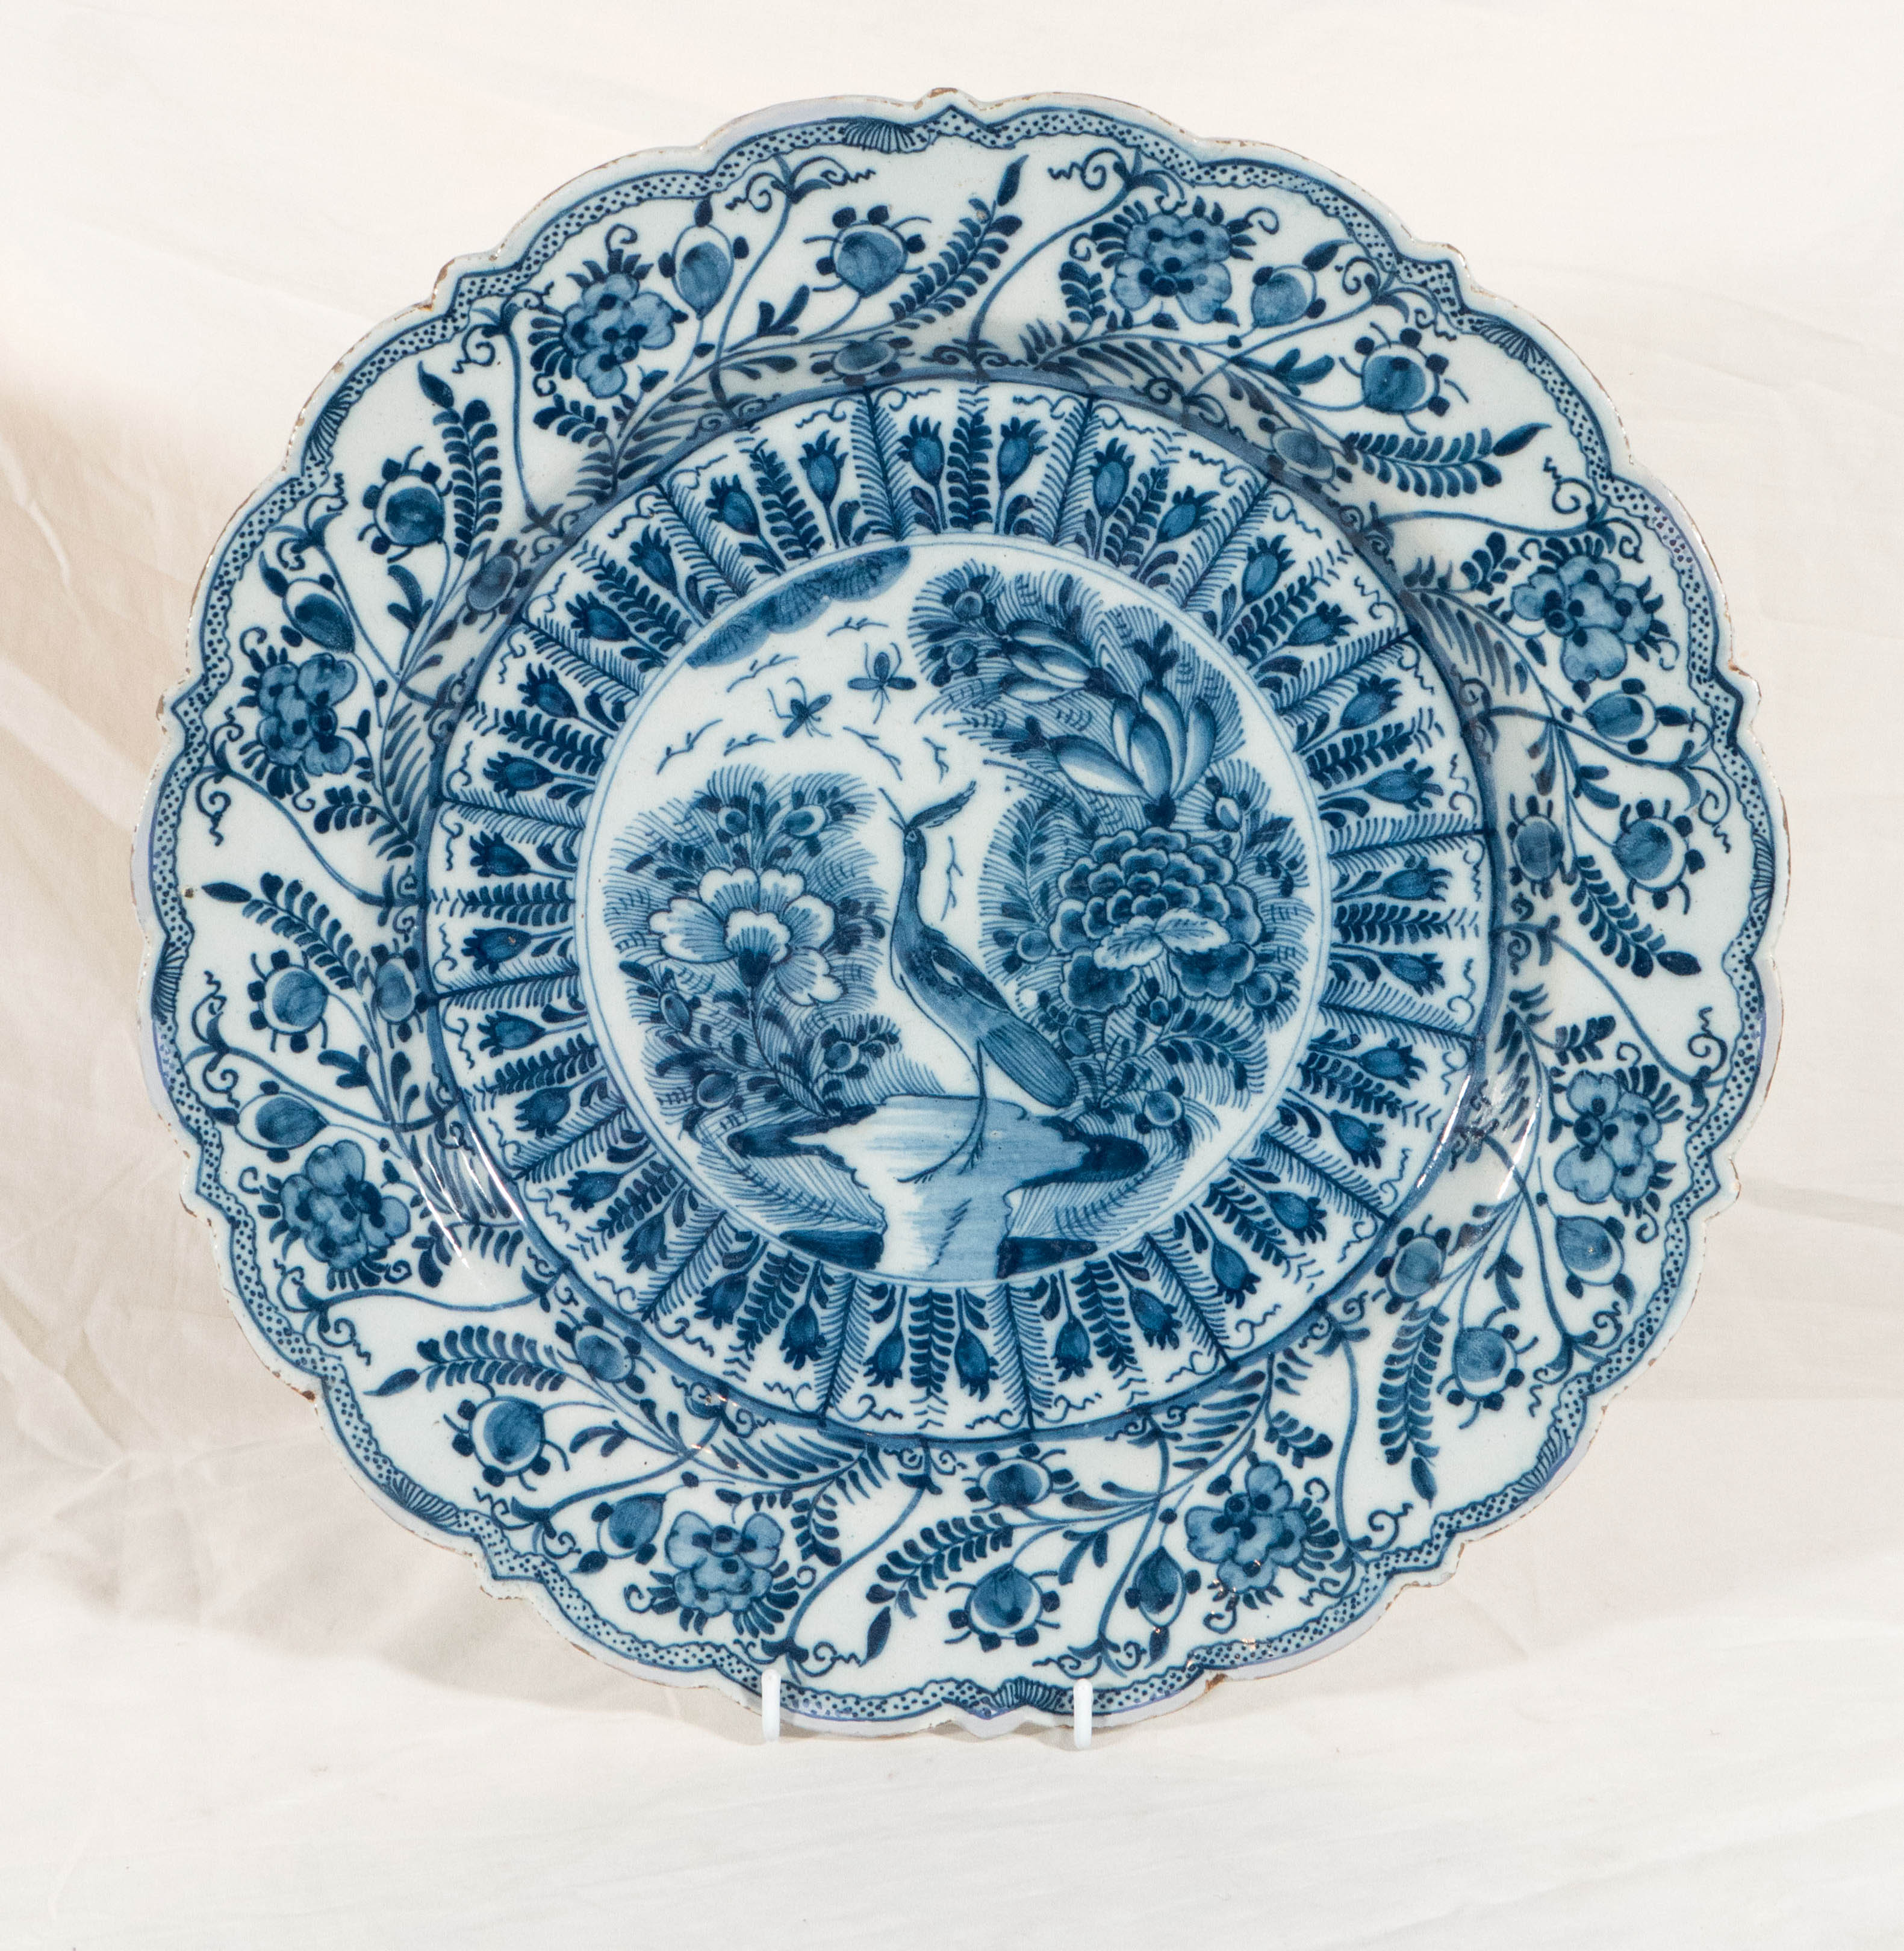 Pair of Dutch Delft Blue and White Chargers